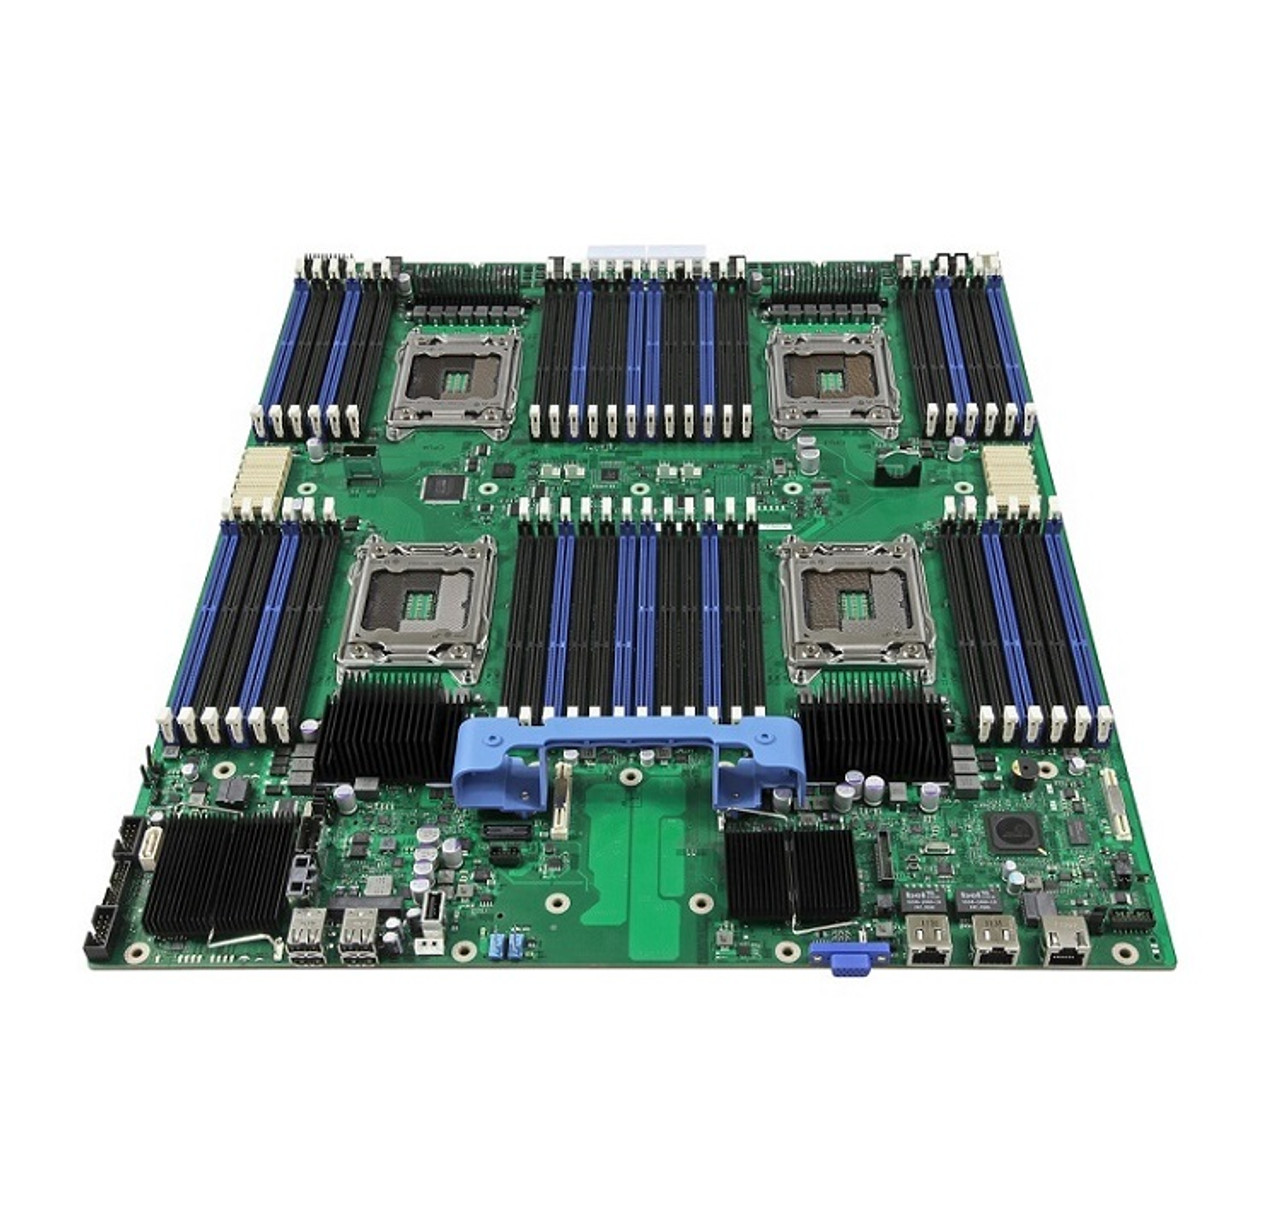 0HY955 - Dell System Board (Motherboard) for PowerEdge 840 Server